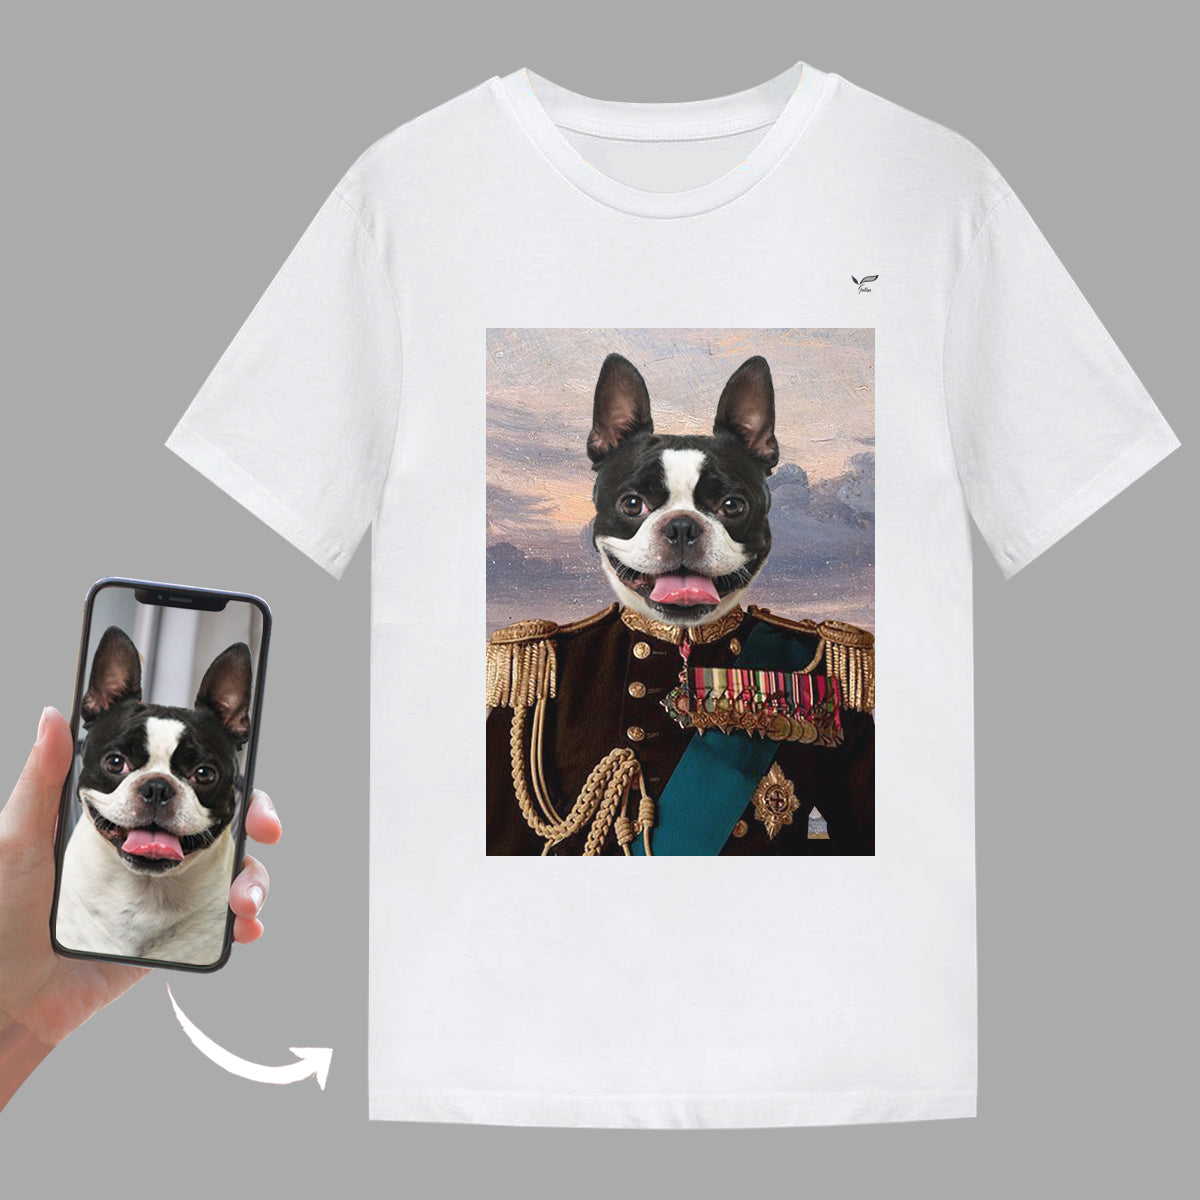 The Veteran - Personalized T-Shirt With Your Pet's Photo